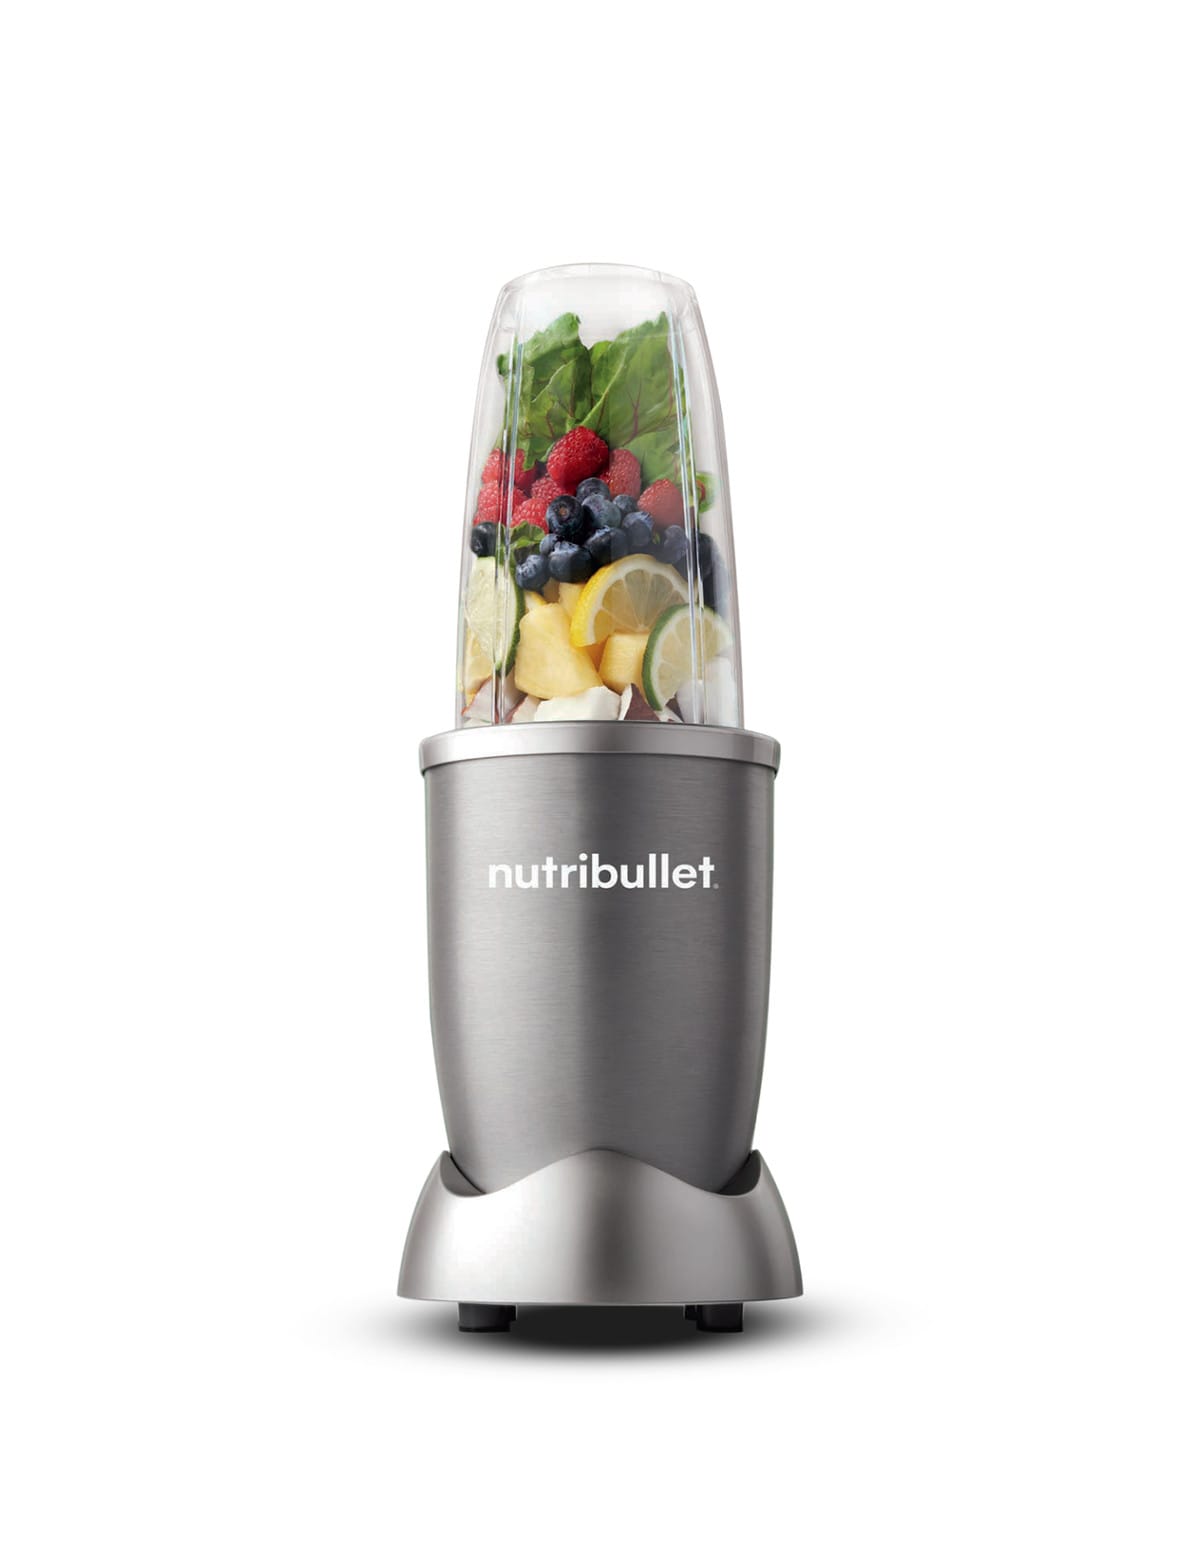 NutriBullet 600W 4pc Certified Reconditioned Food Blender